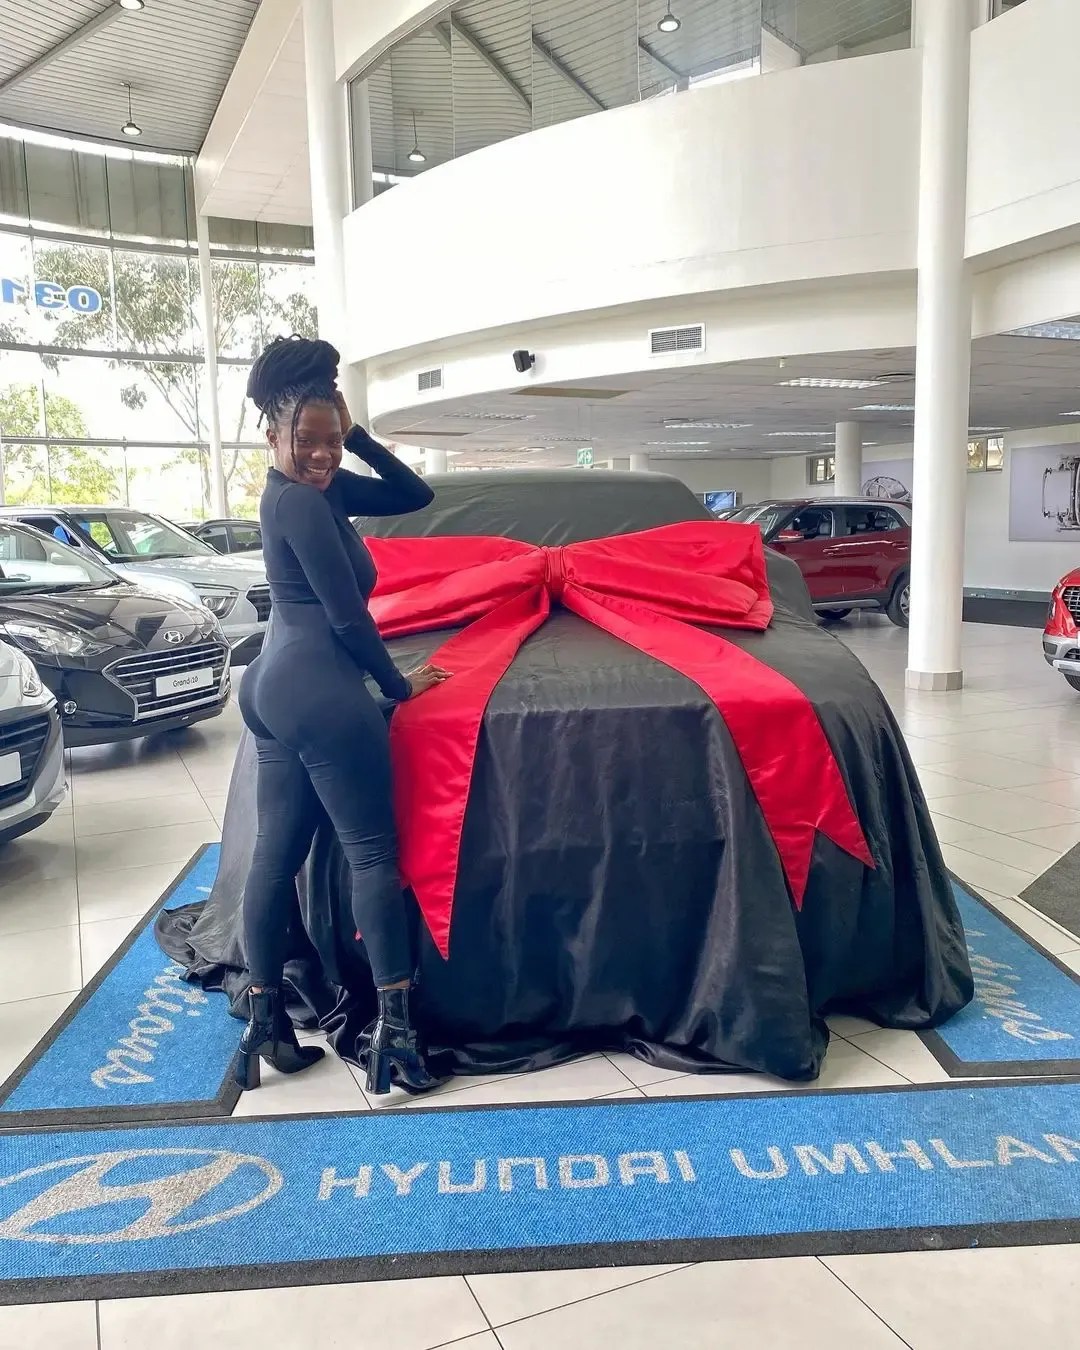 Uzalo Actress Noxolo Mathula(Lilly) buys blesses herself with a R1 million car – Photos